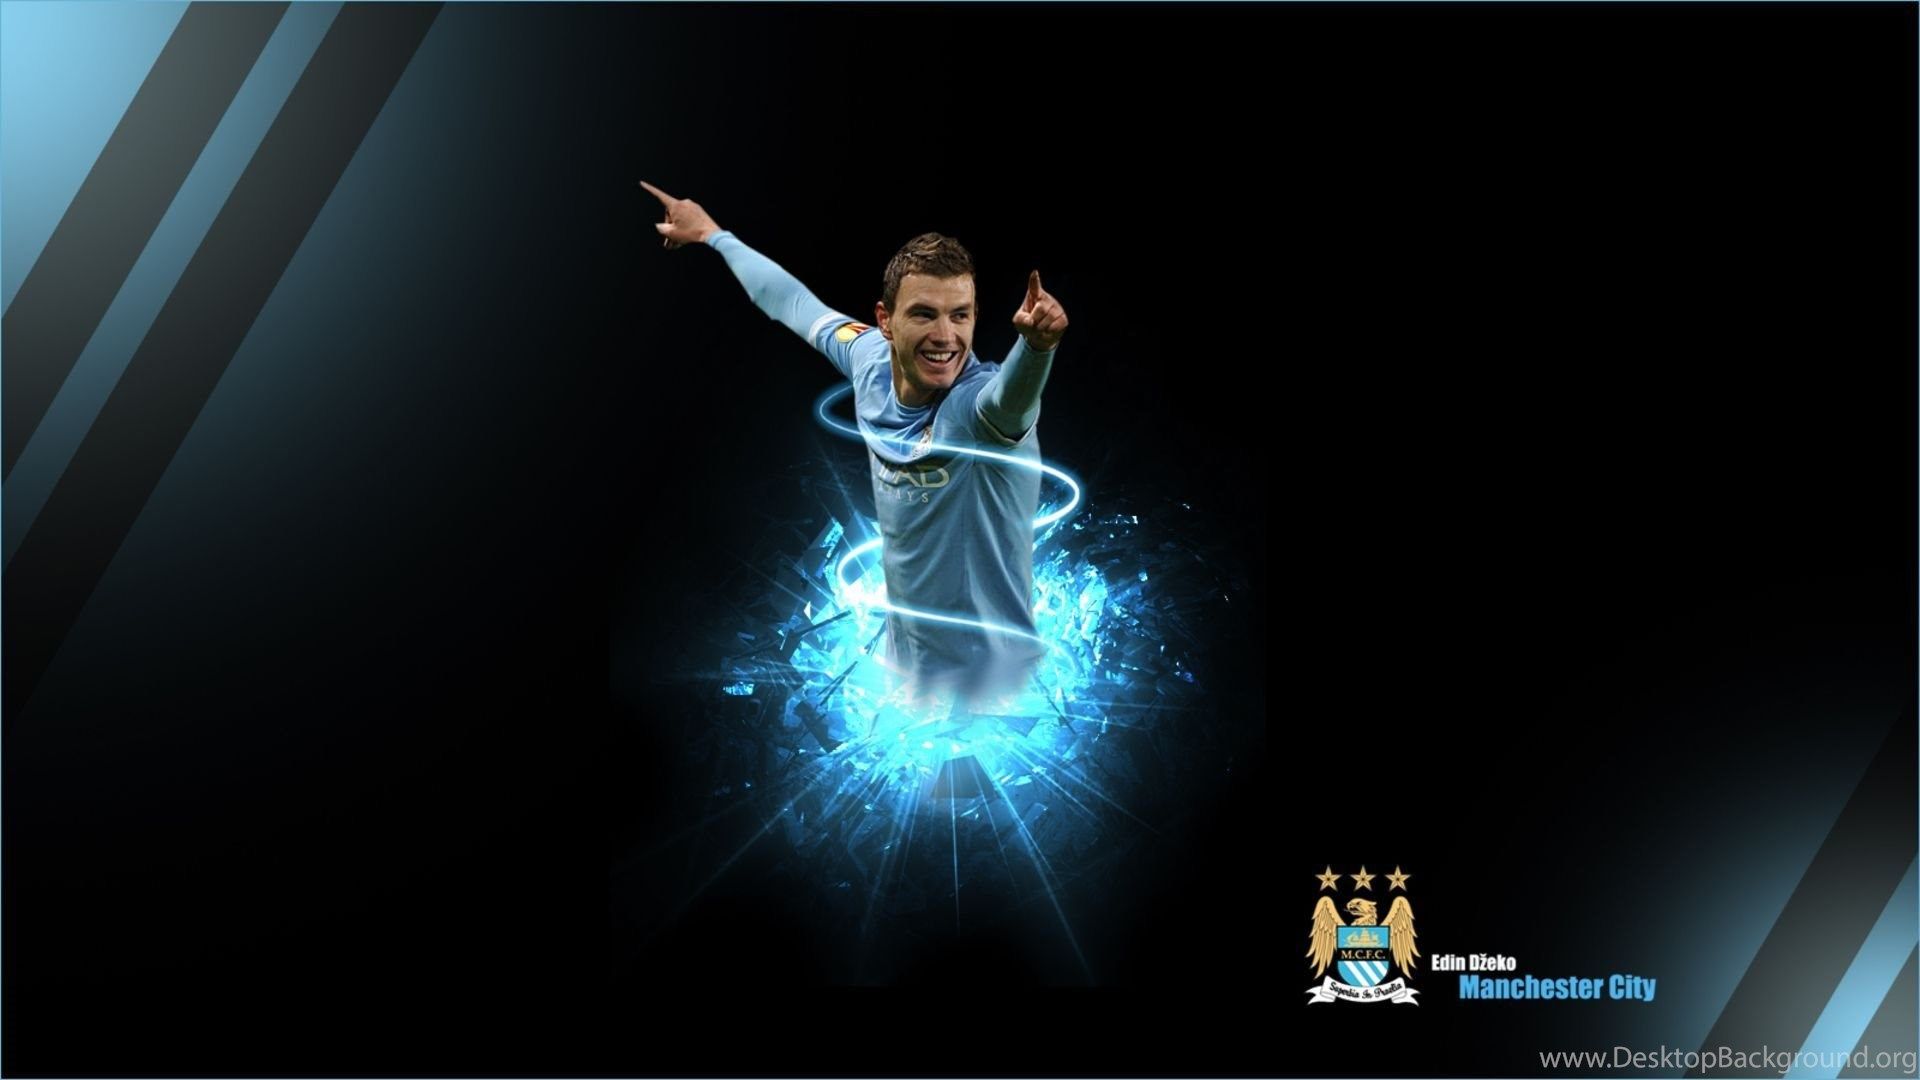 Football Player Of Manchester City Wallpaper And Image. Desktop Background